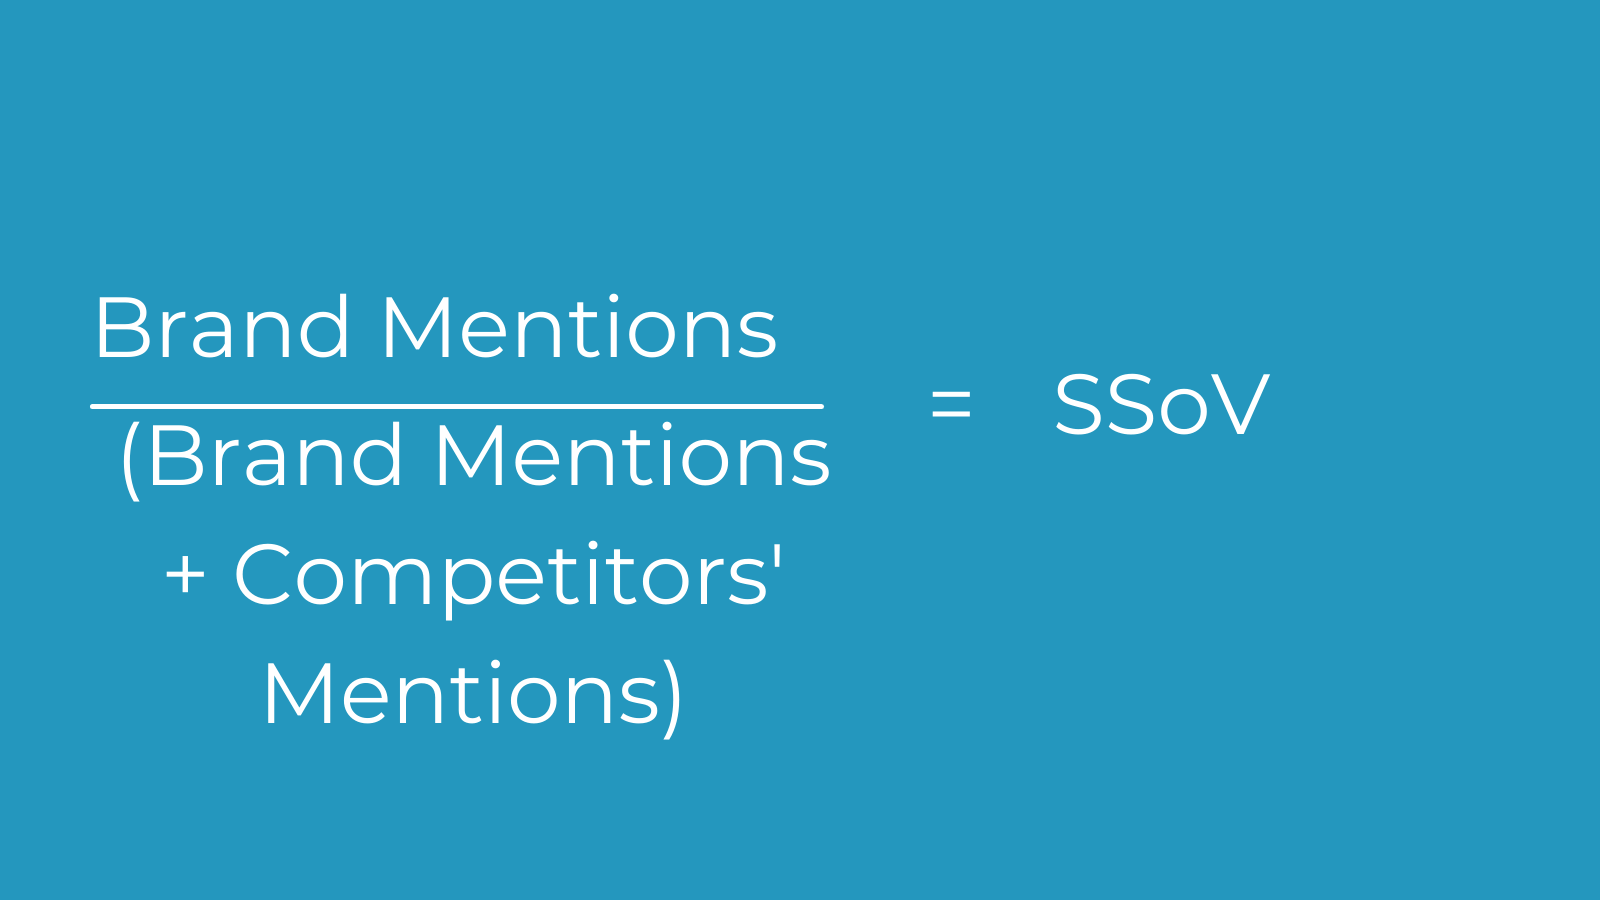 An infographic that reads "Brand mentions divided by (brand mentions + competitors' mentions) = SSoV)